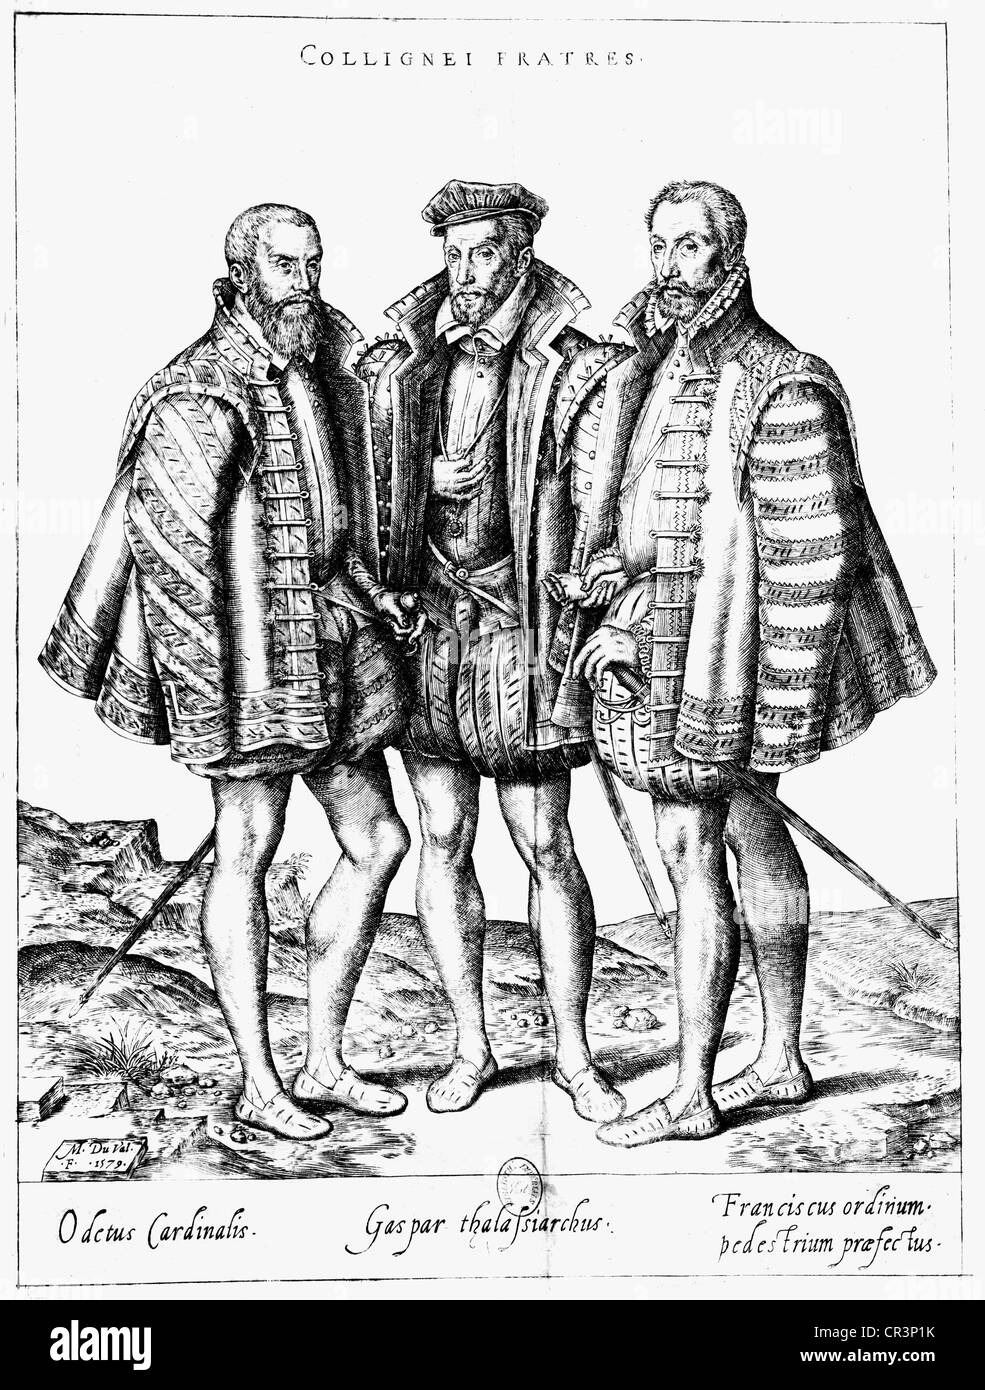 Coligny, Gaspard II de, Lord of Chatillon, 16.2.1519 - 24.8.1572, French politician, Admiral of France 1552 - 1572, with his brothers Odet, Cardinal of Chatillion, and Francois d'Andelot, drawing by Marc Duval, 1579, , Stock Photo